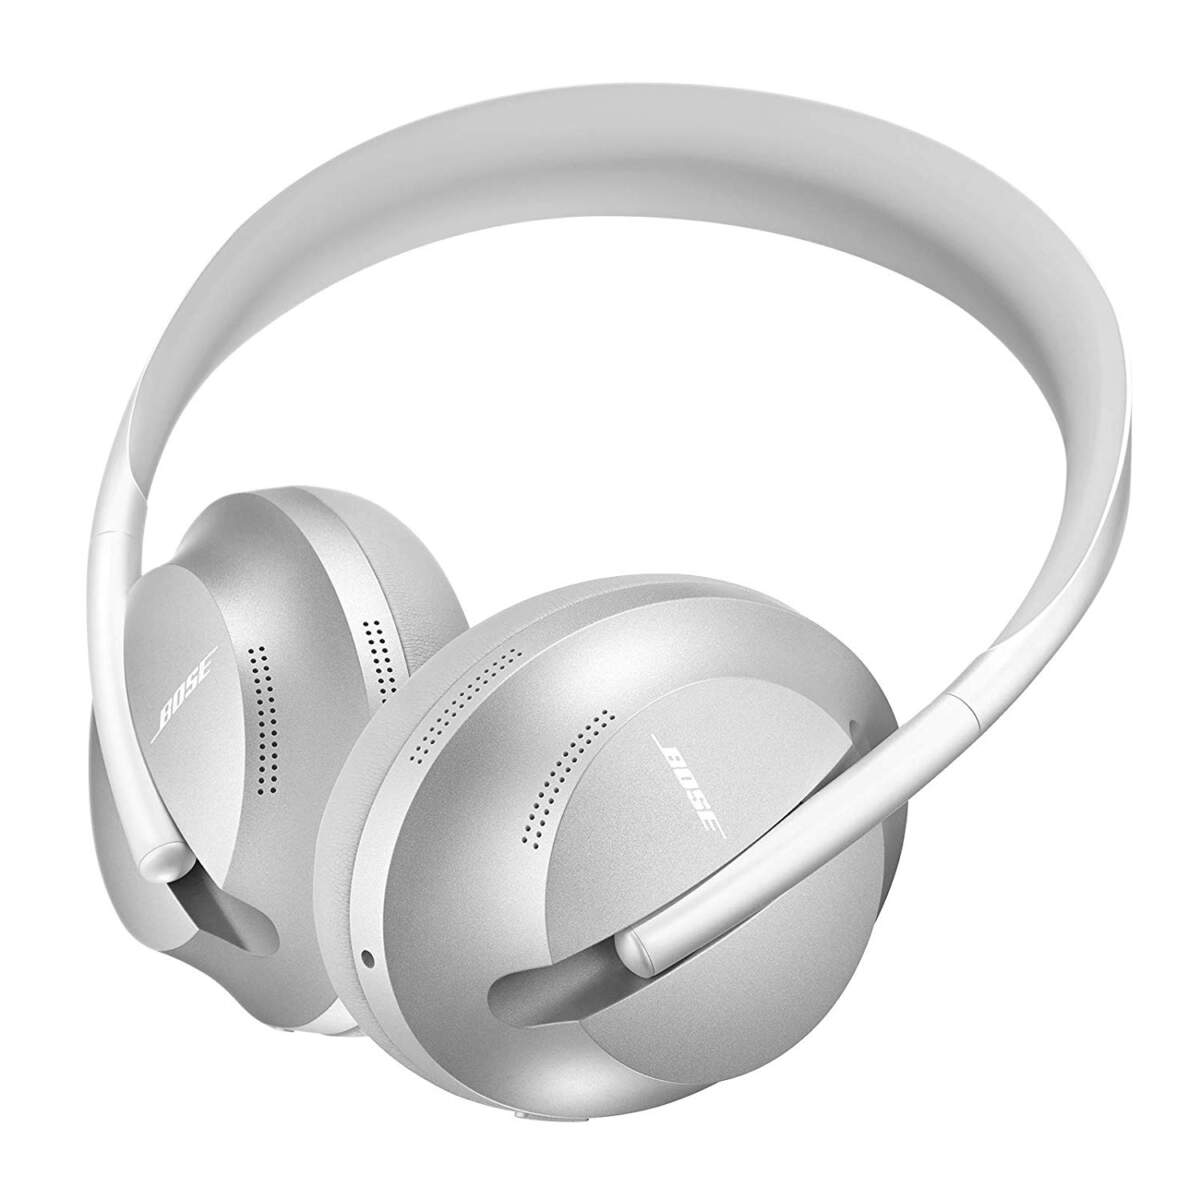 Bose Wireless Bluetooth Noise Cancelling Headphones 700 with Charging Case (Luxe Silver)